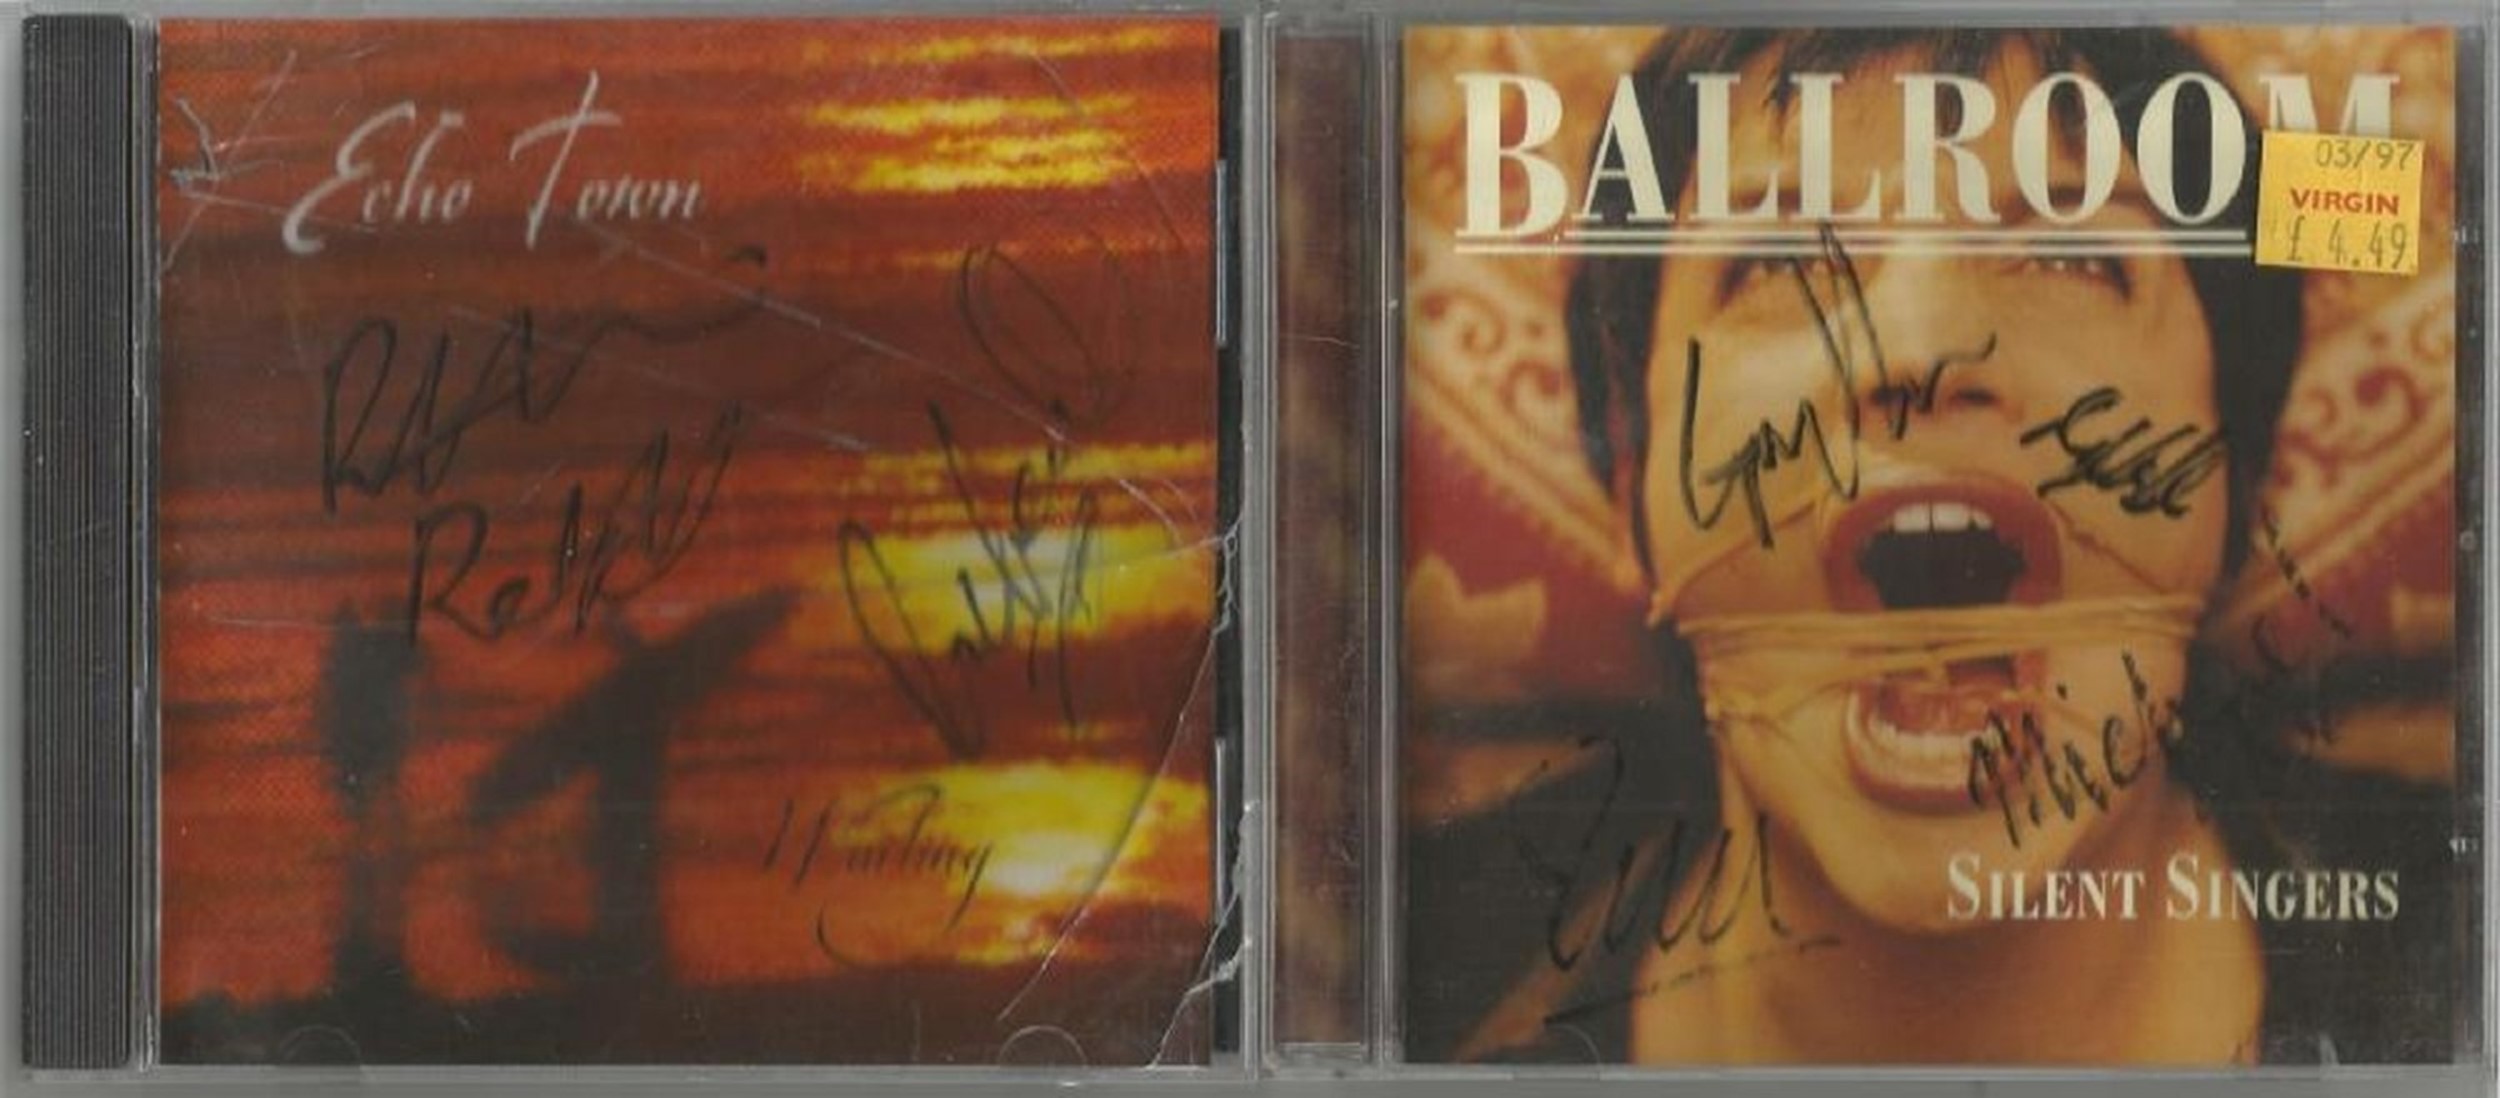 6 Signed CDs Including Ballroom Silent Singers Disc Included, John Gorka After Yesterday Disc